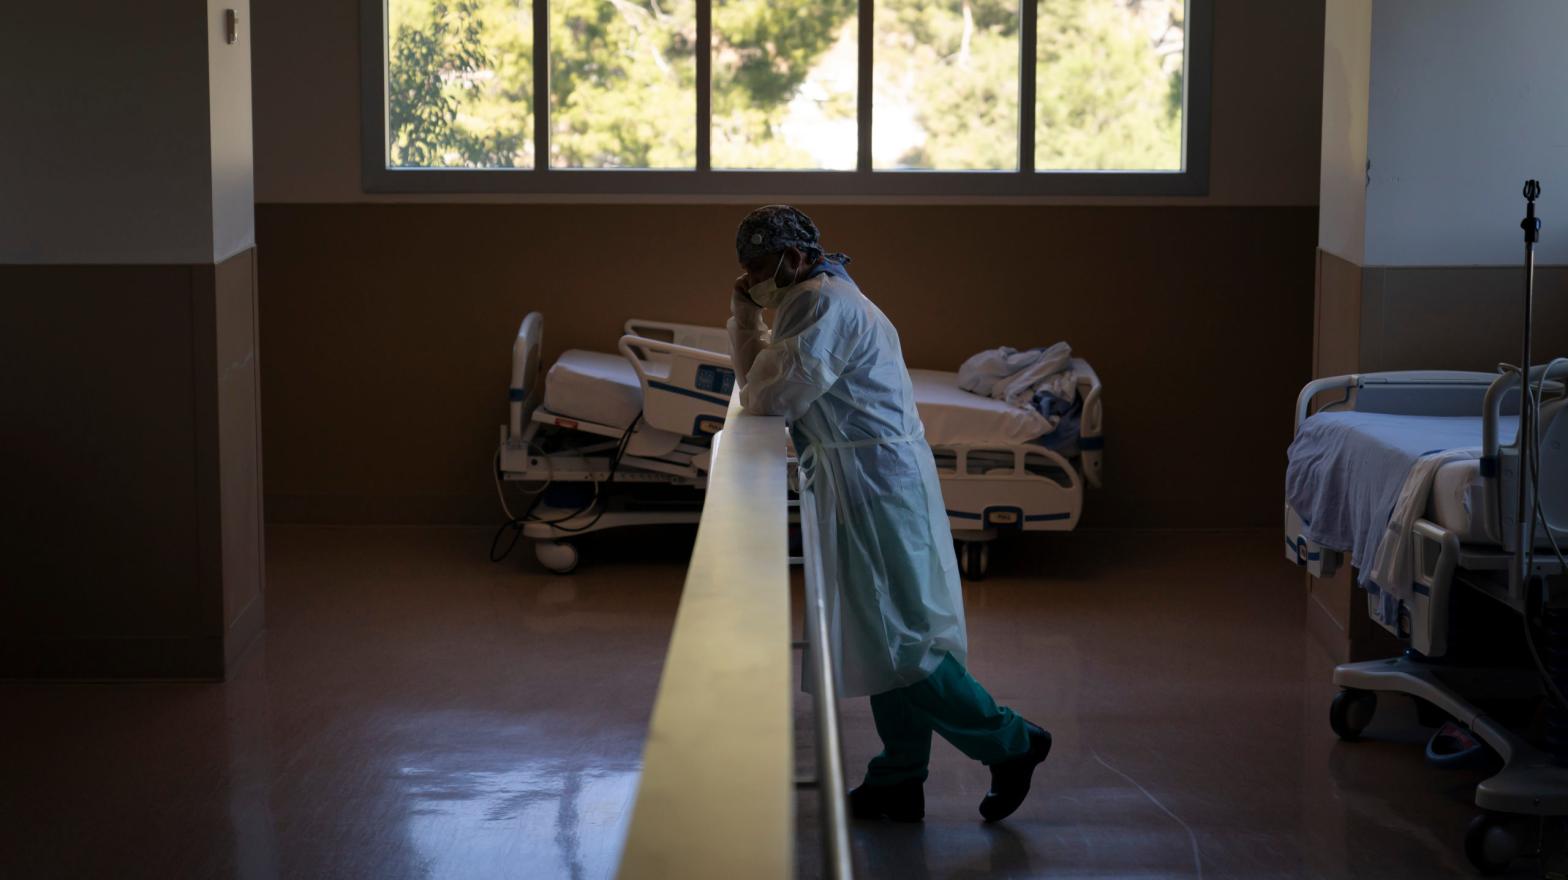 Respiratory therapist Babu Paramban talks on the phone next to hospital beds while taking a break in the COVID-19 unit at Providence Holy Cross Medical Centre in the Mission Hills section of Los Angeles, Thursday, Nov. 19, 2020. (Photo: Jae C. Hong, AP)